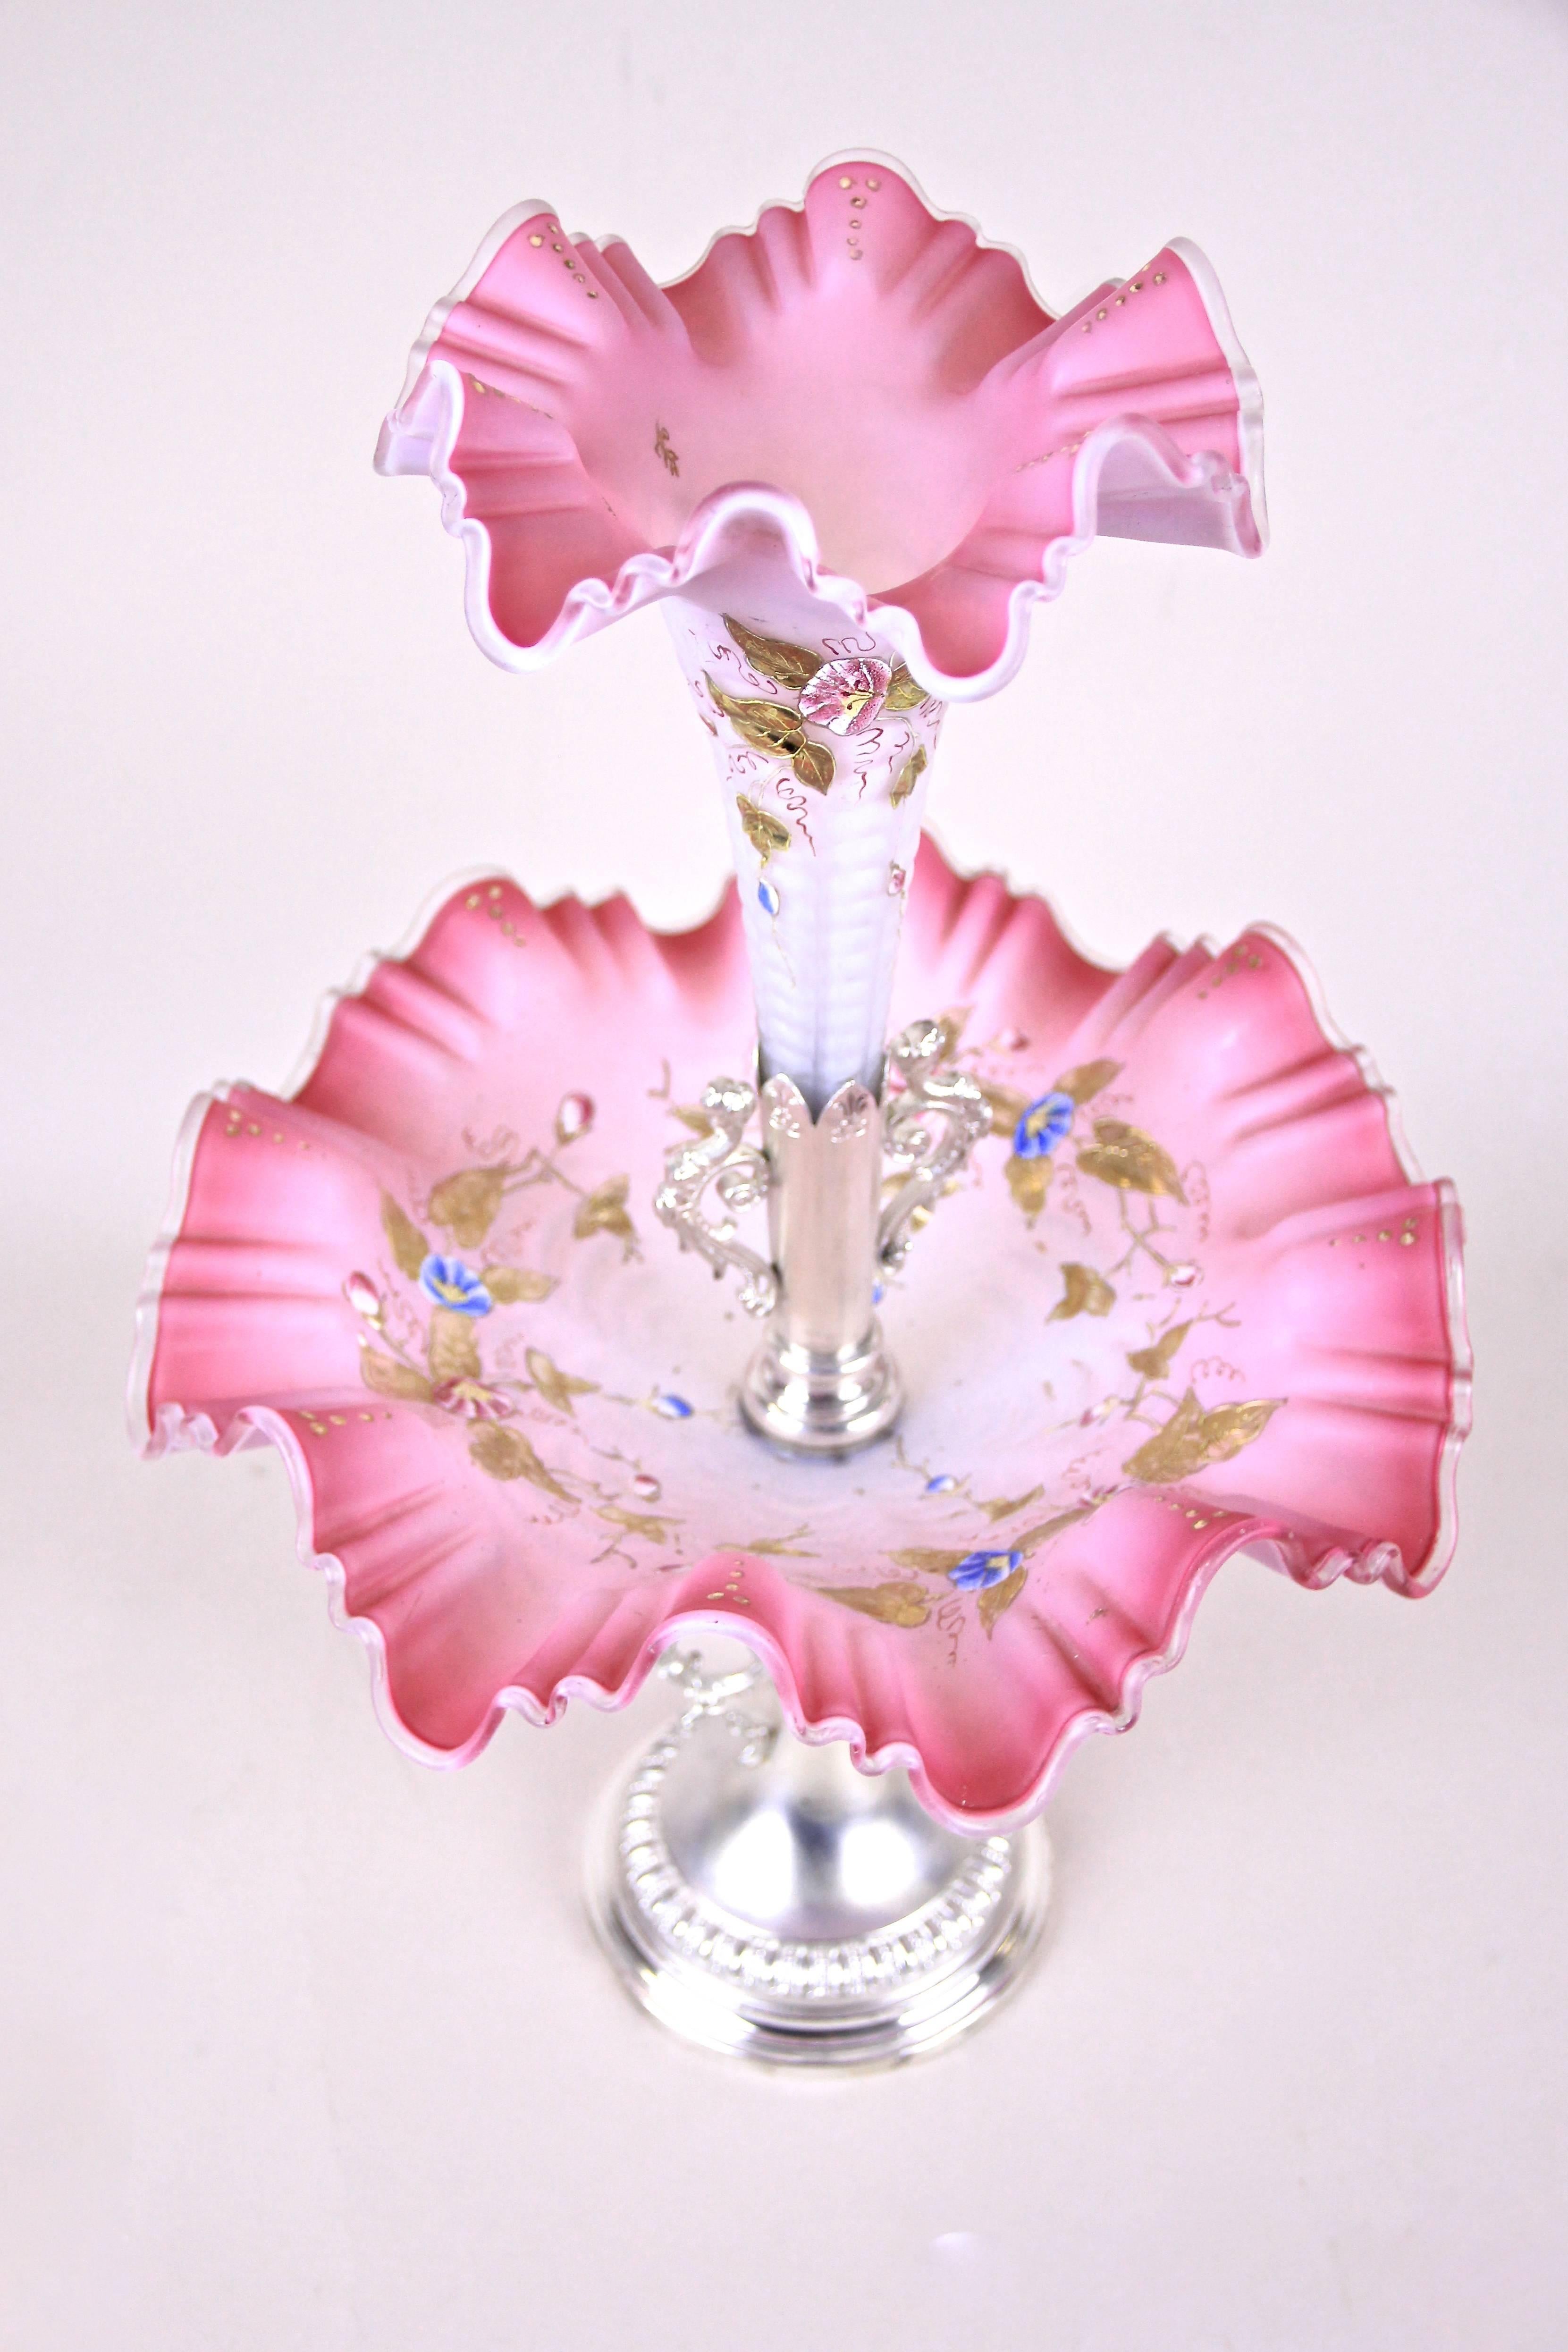 Charming Art Nouveau centrepiece made in Austria, circa 1900. A beautiful in pink tones shining mouth blown glass bowl sits on a metal - silver plated centrepiece with figural handles and shows an amazing enamel-painting that continues on the